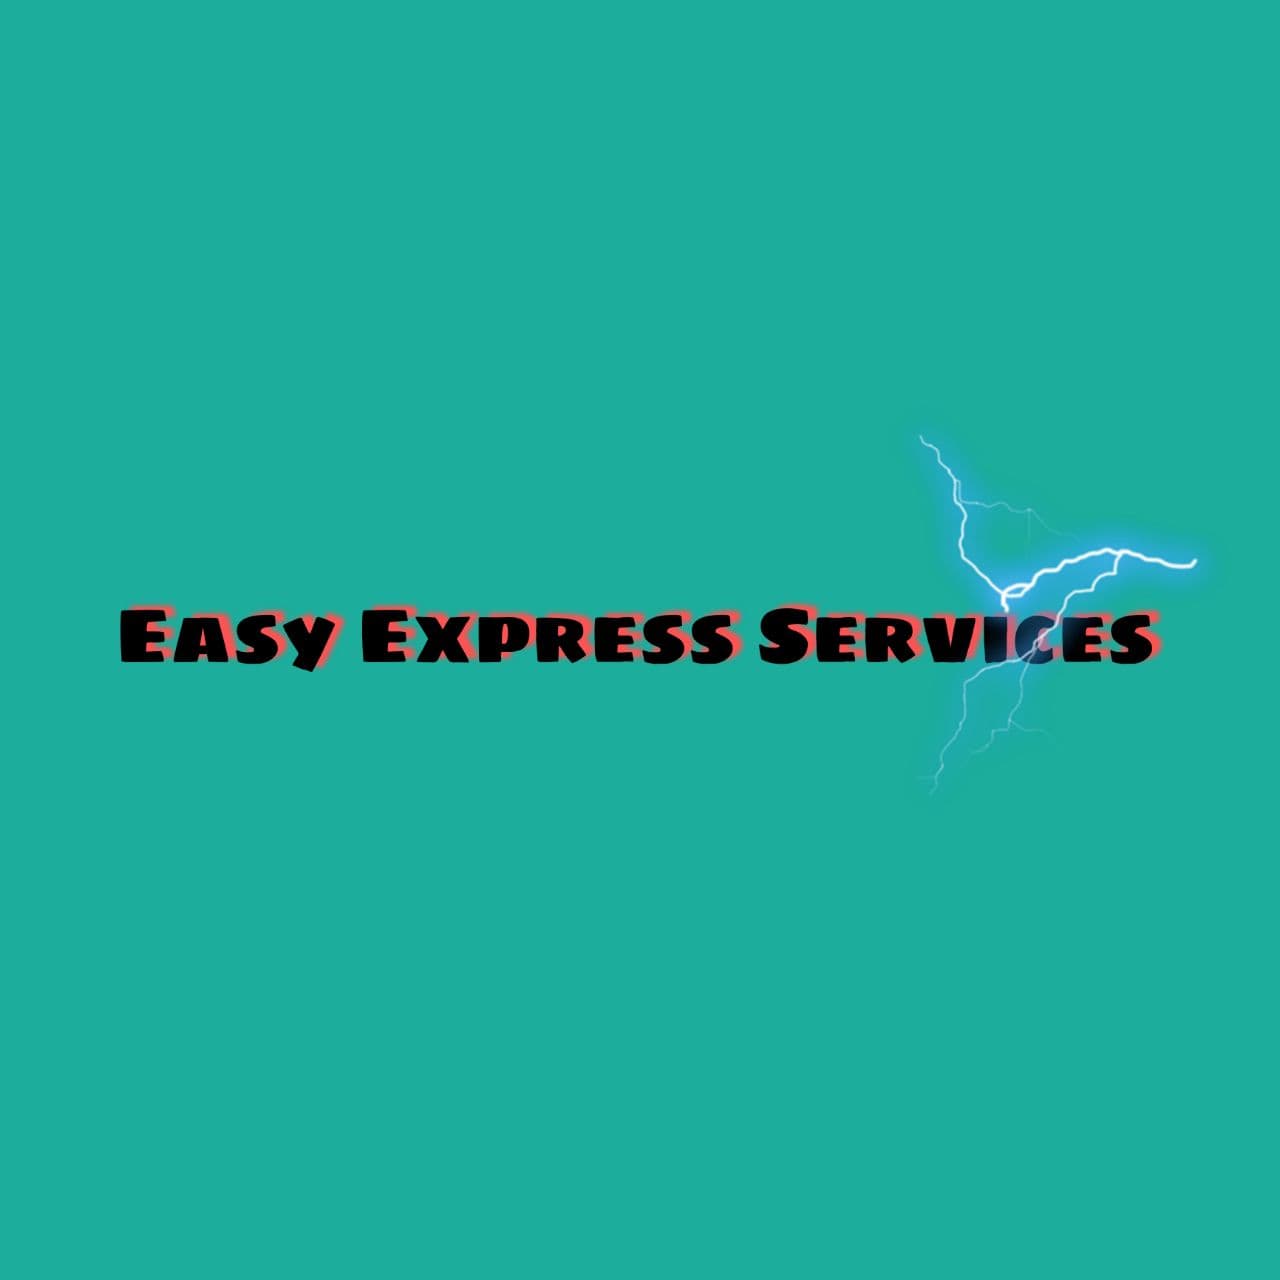 Easy Express Services